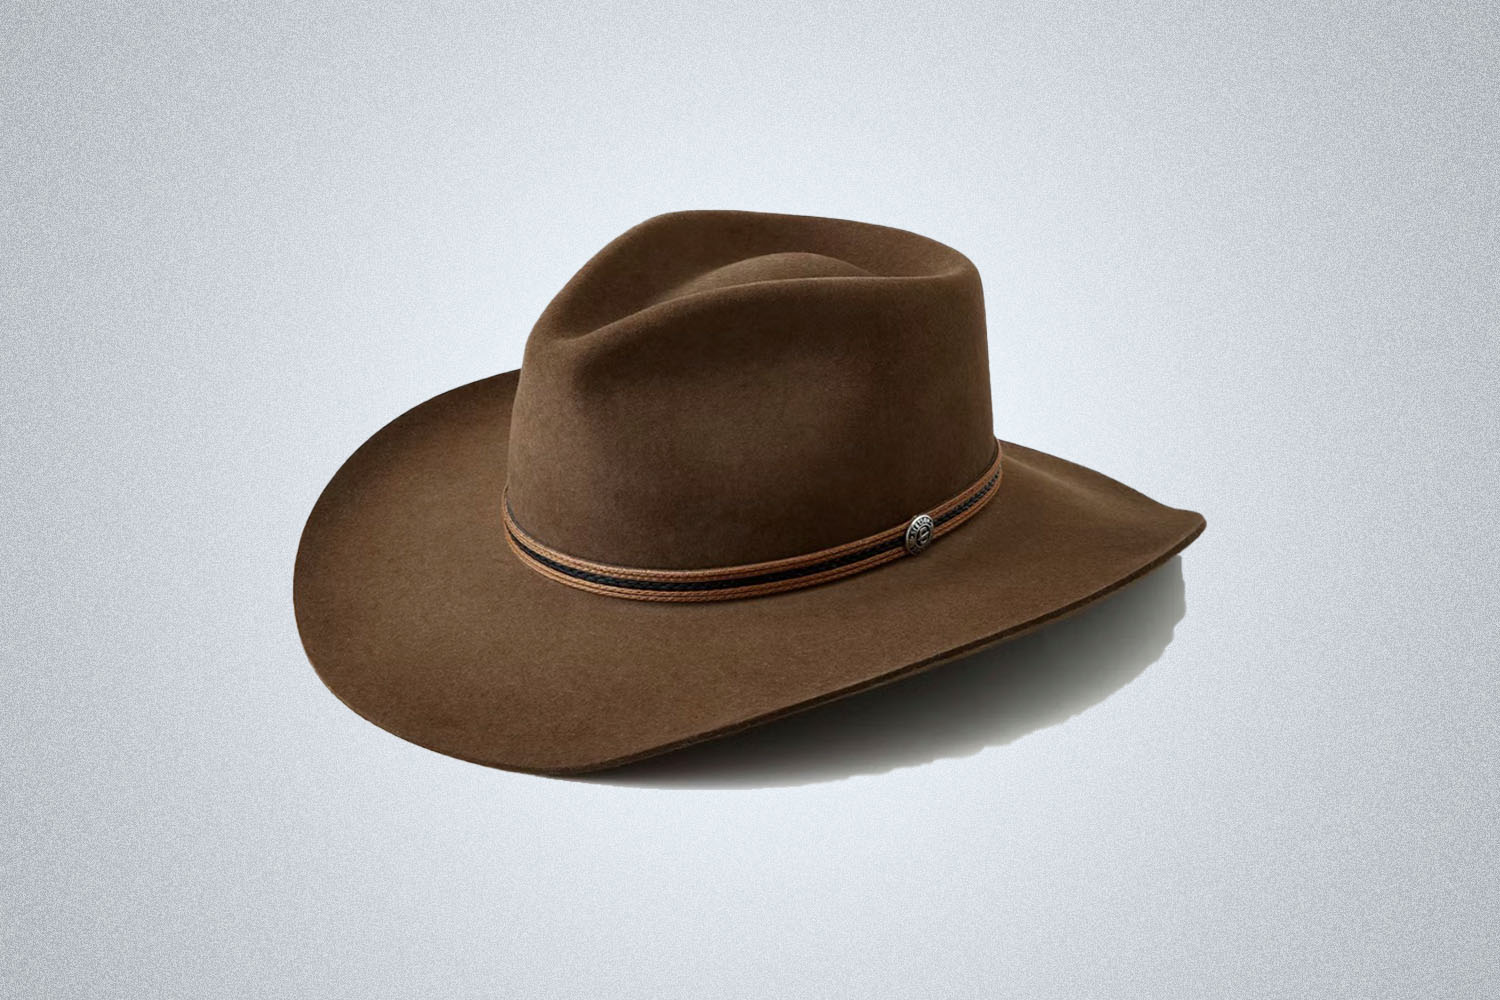 a stetson wide-brimmed cowboy hat on a grey background